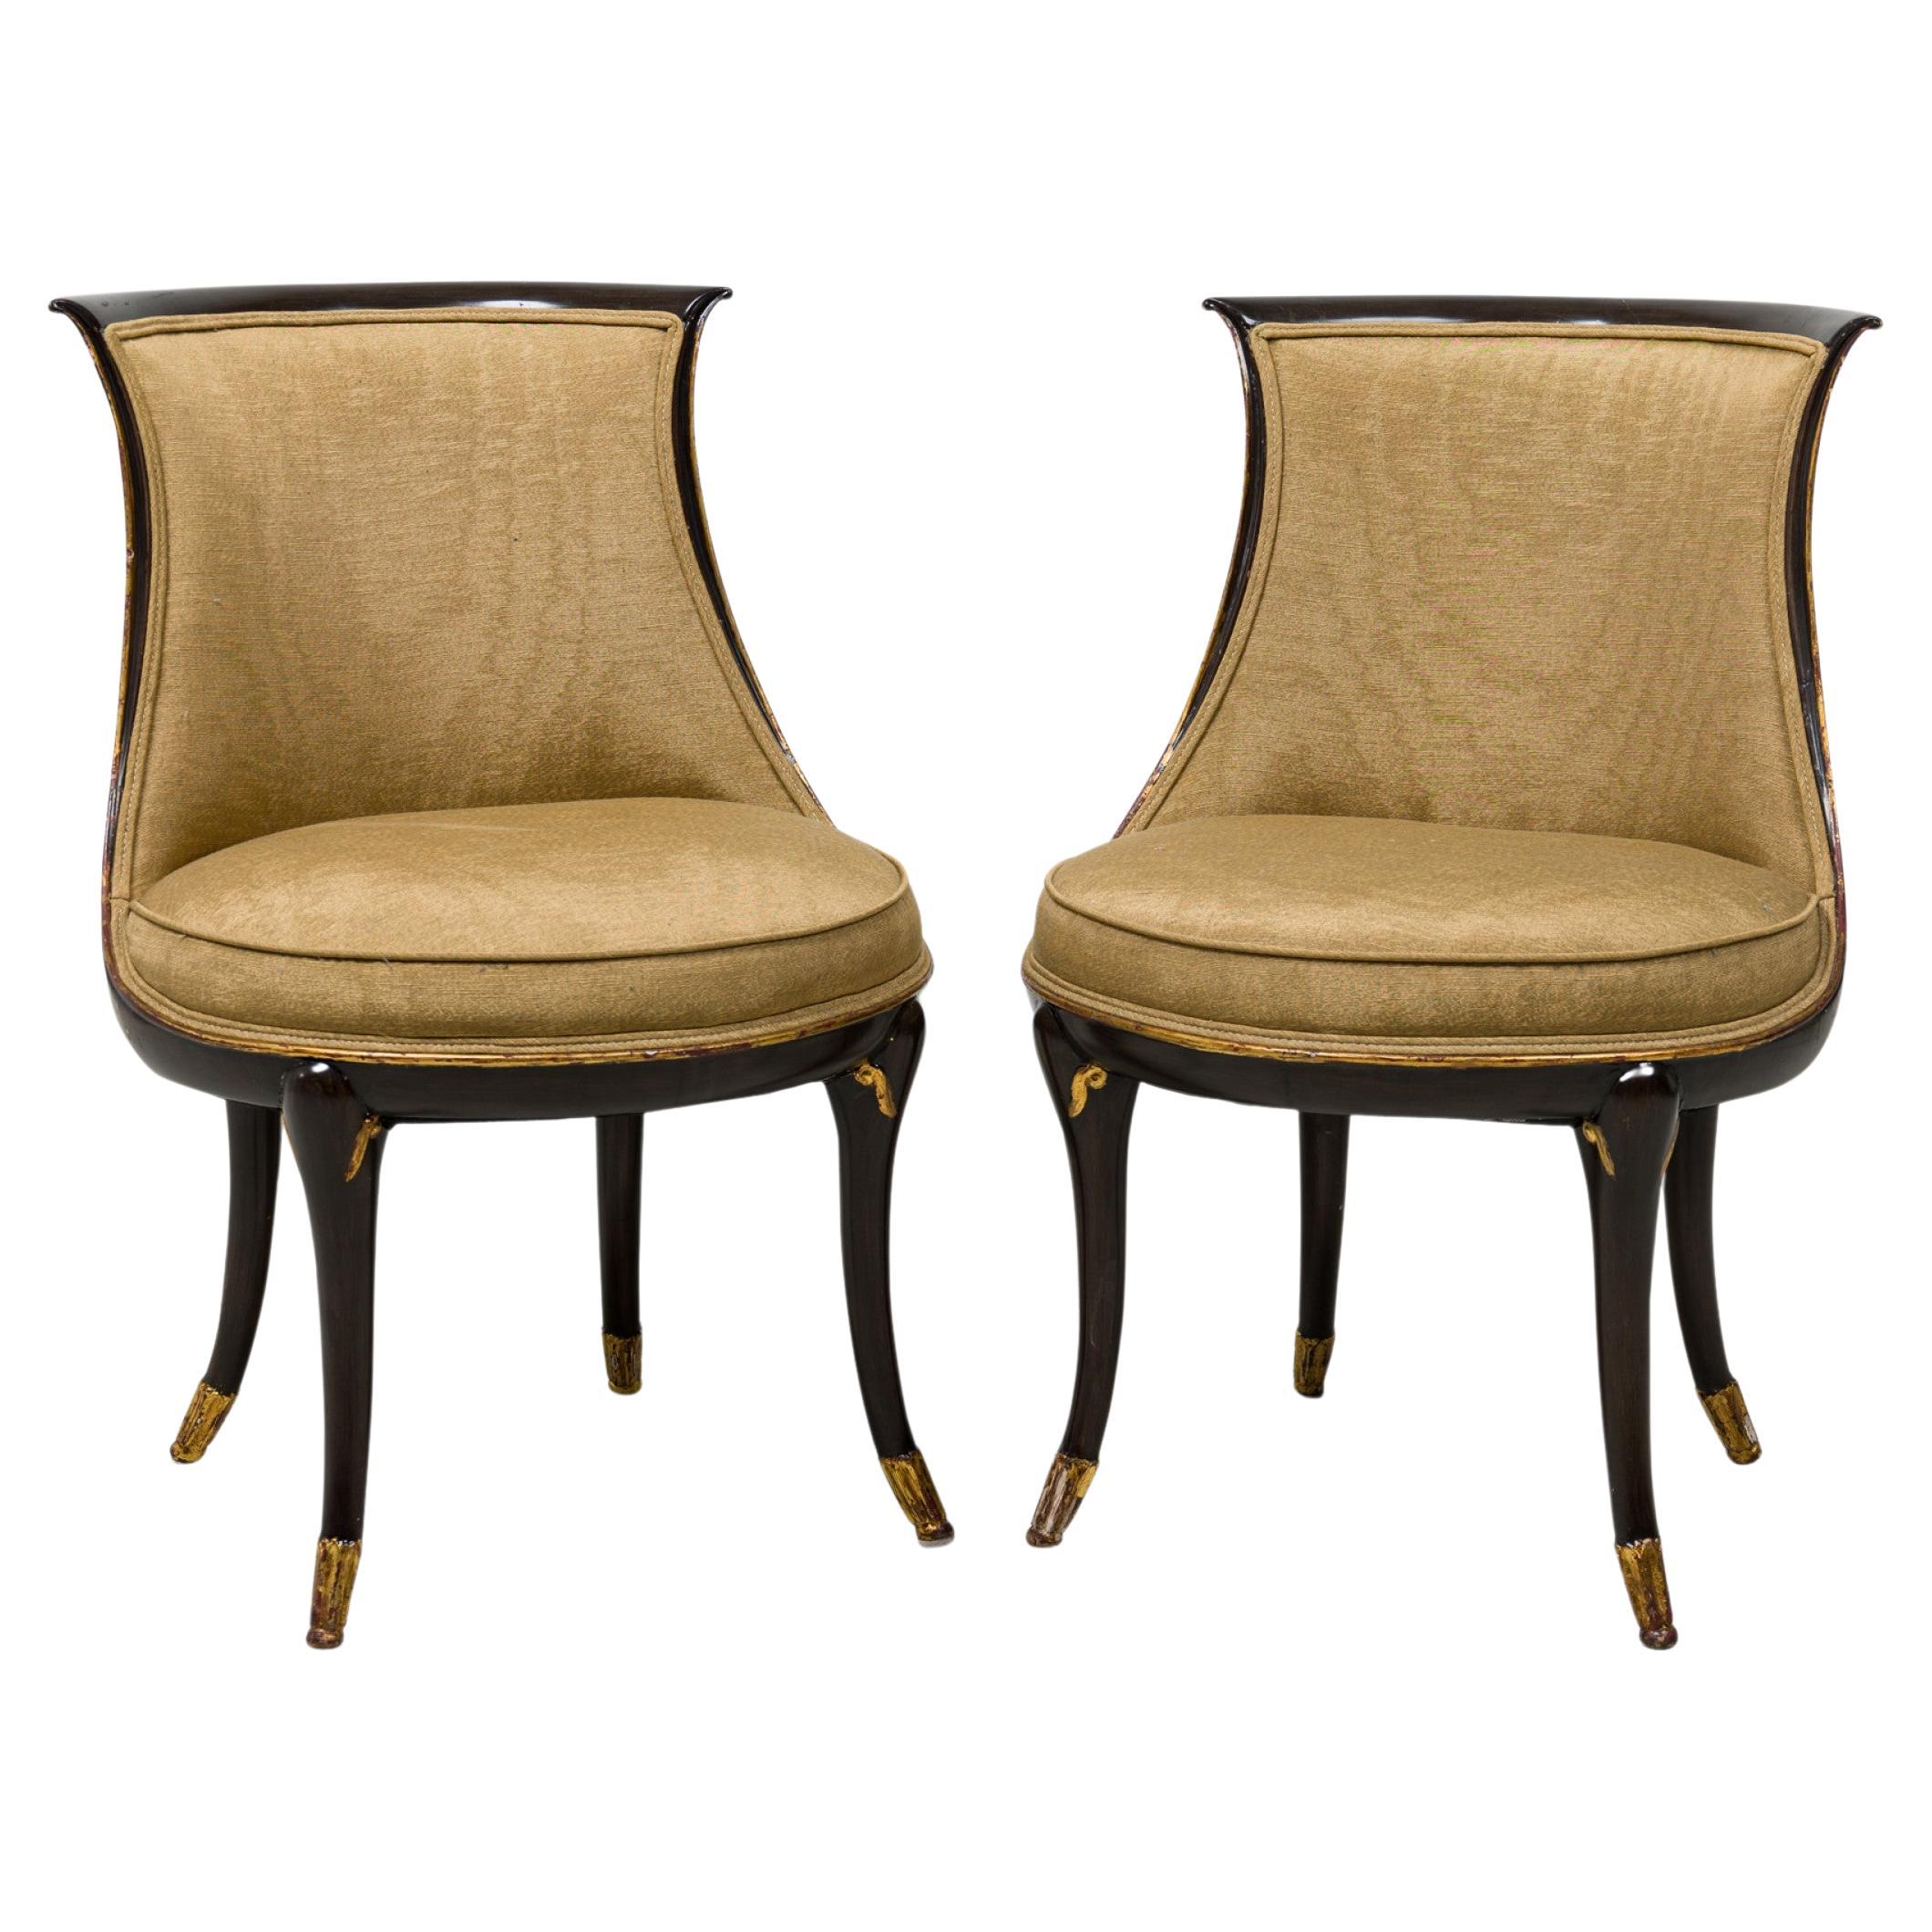 Set of 4 Michael Taylor American Walnut & Brass Inlaid Upholstered Dining Chairs For Sale